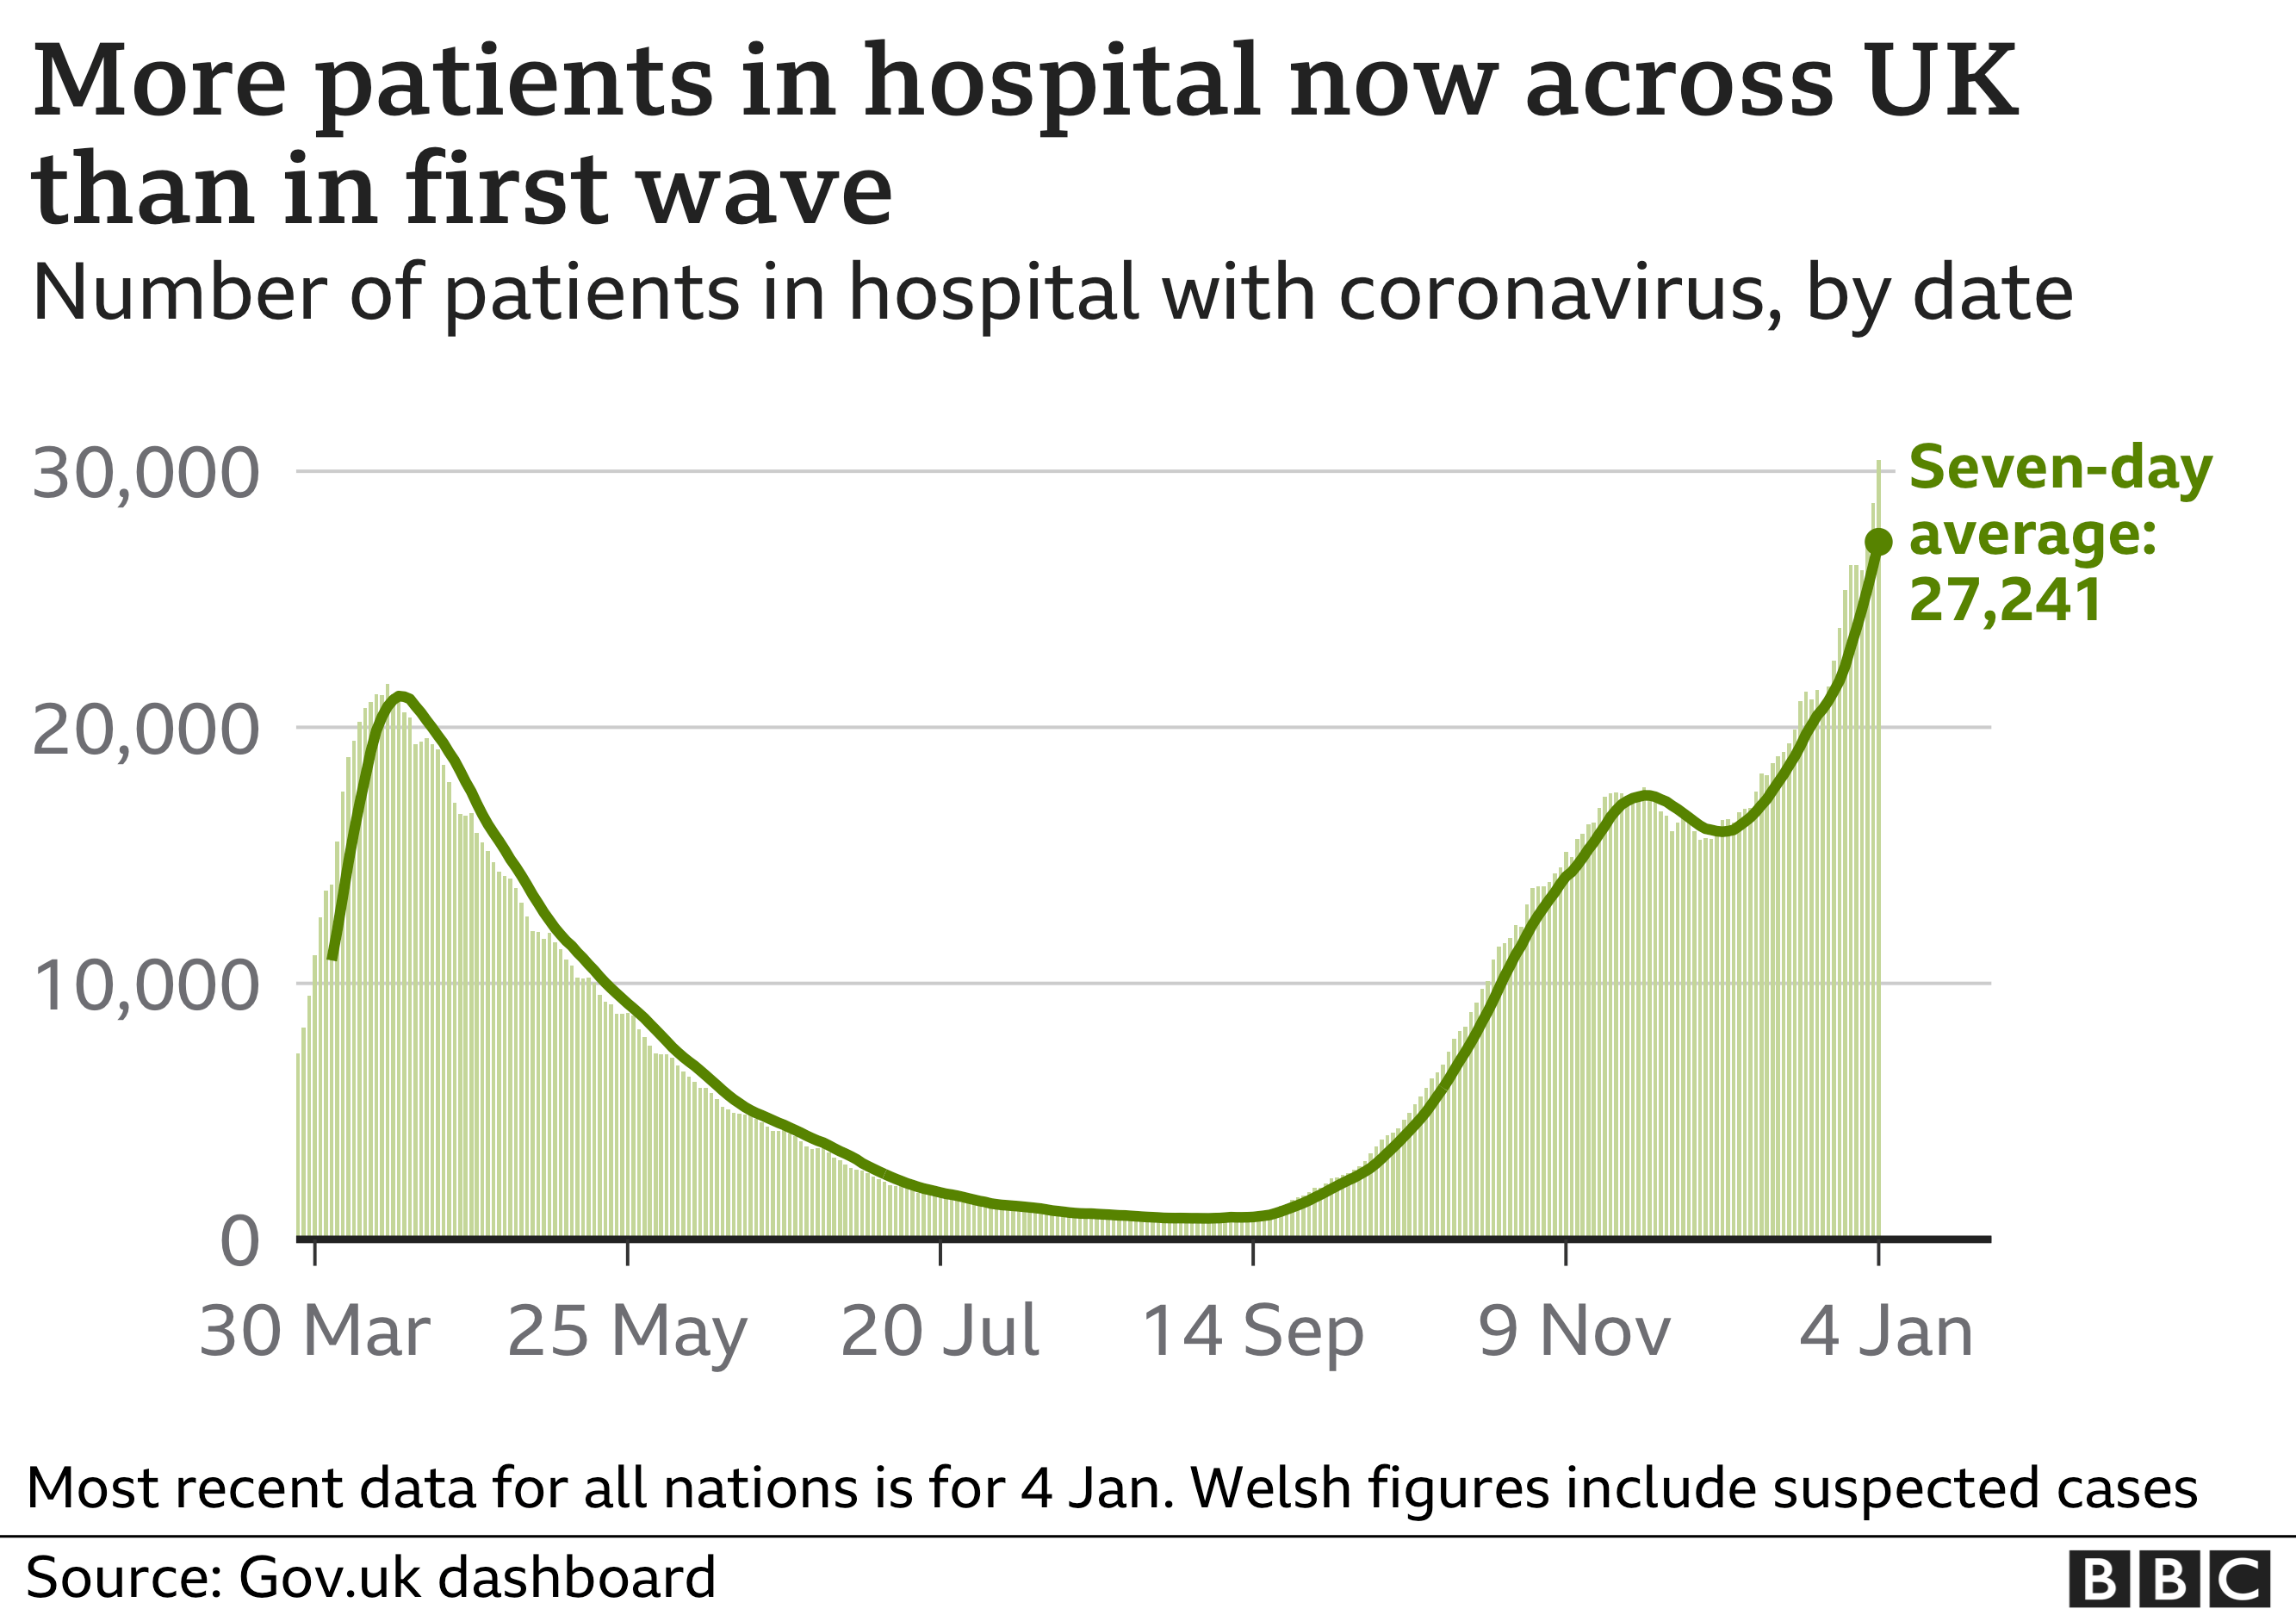 Chart shows number in hospital now higher than in first wave